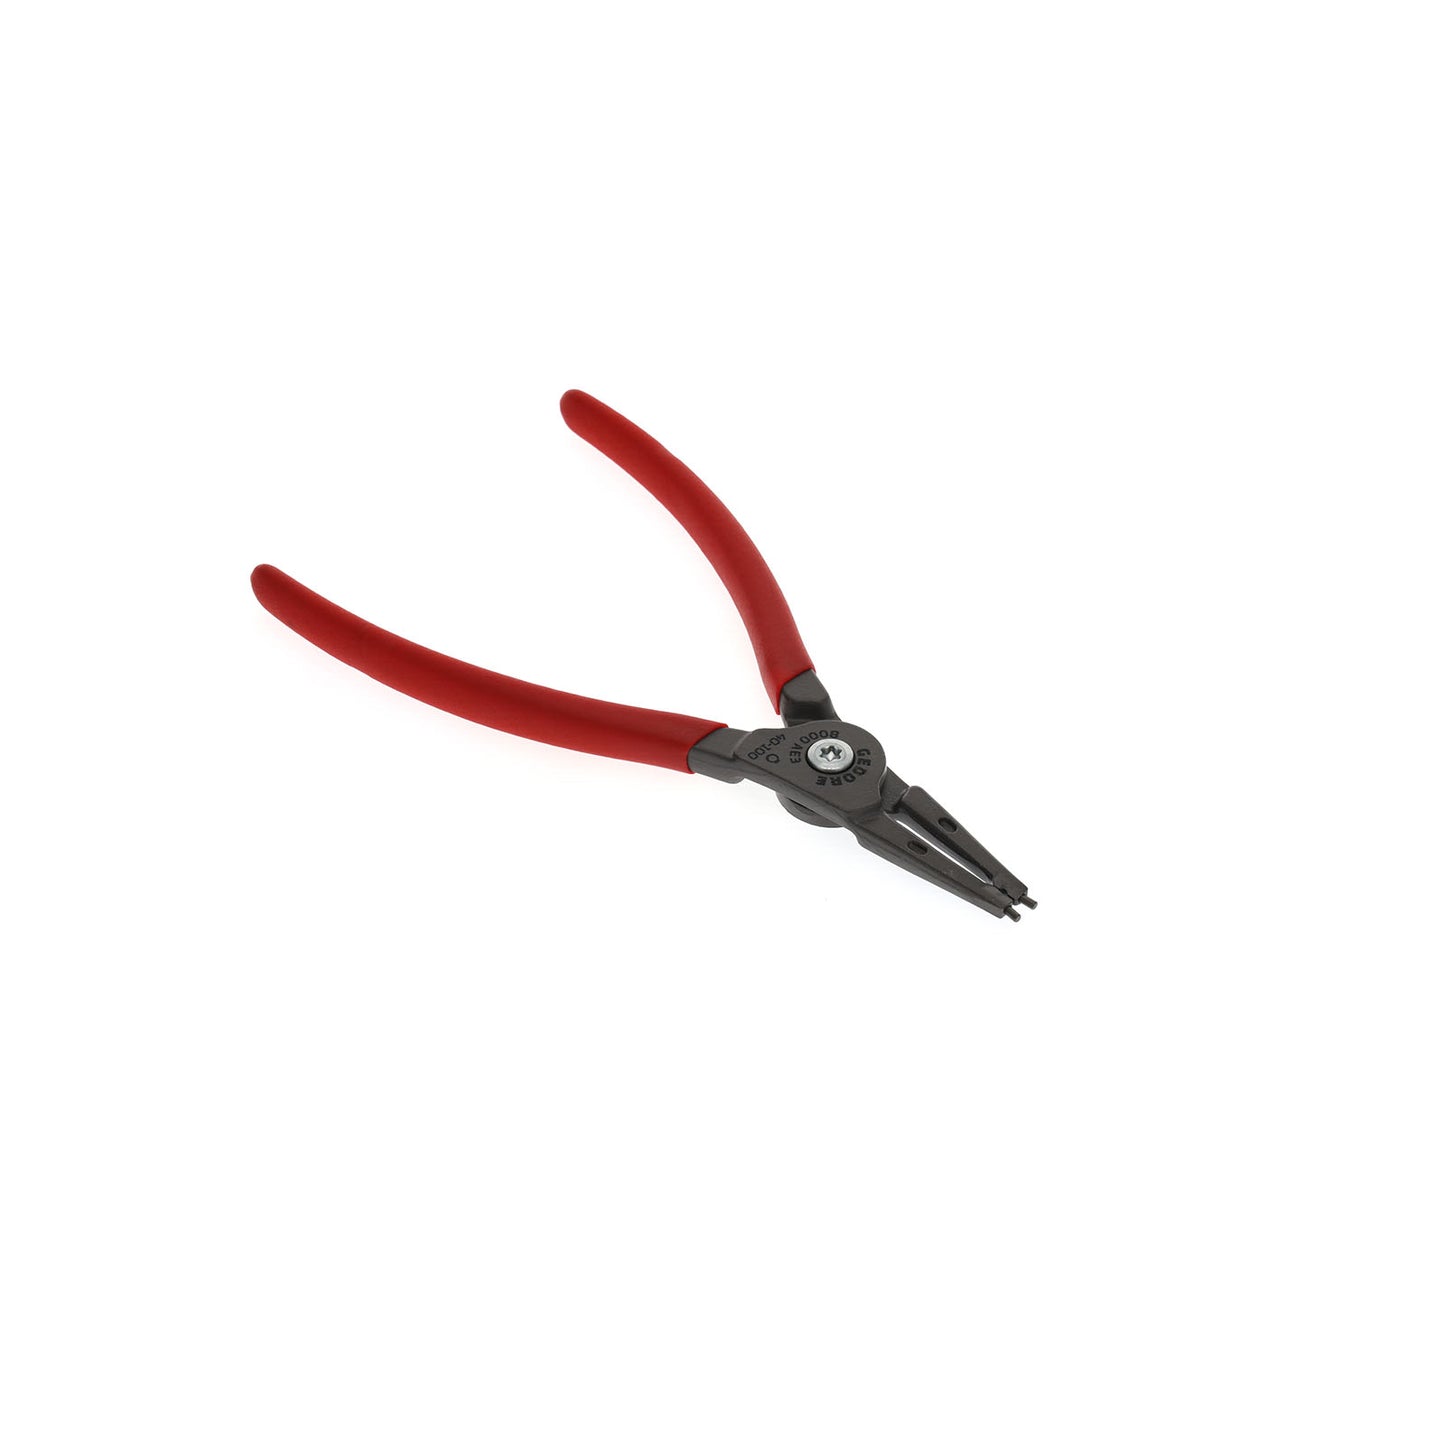 GEDORE 8000 AE 3 - Straight Circlip Ext. 40-100mm (2930676)